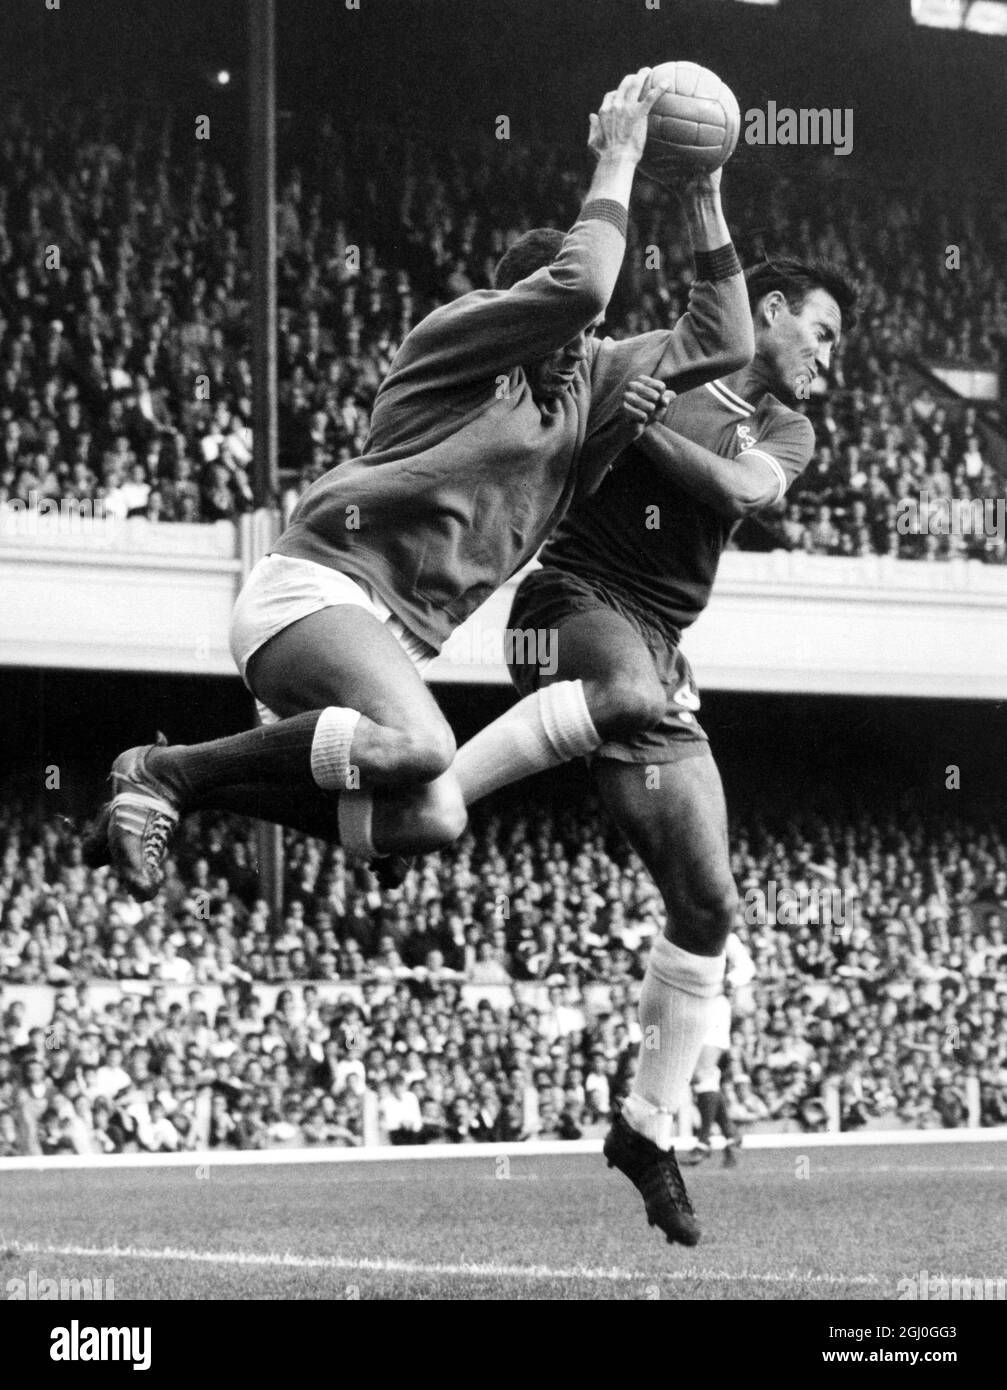 Arsenal v Chelsea Arsenal goalkeeper, Jim Furnell leaps to snatch the ball away from the Chelsea centre-forward, Barry Bridges' head to halt another Chelsea attack during the London derby at Highbury. 26th September 1964 Stock Photo